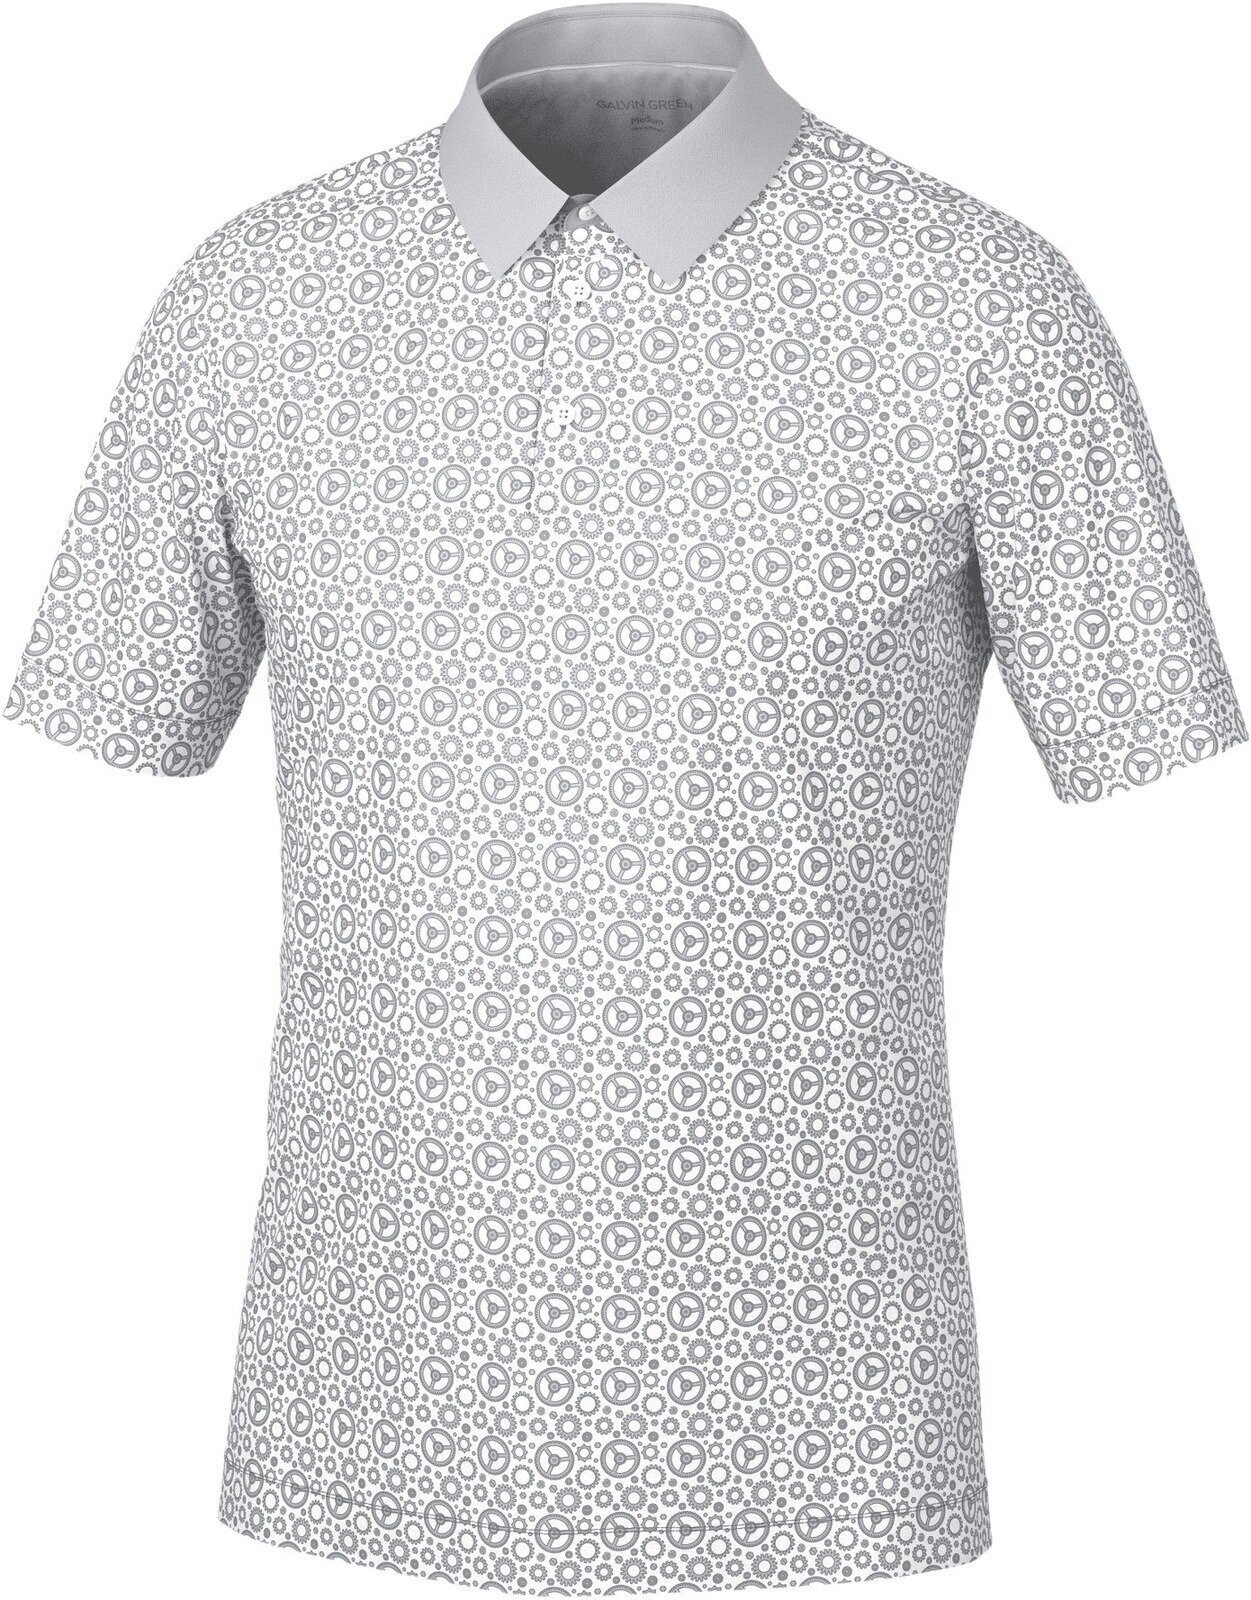 Chemise polo Galvin Green Miracle Mens Polo Shirt White/Cool Grey M Chemise polo